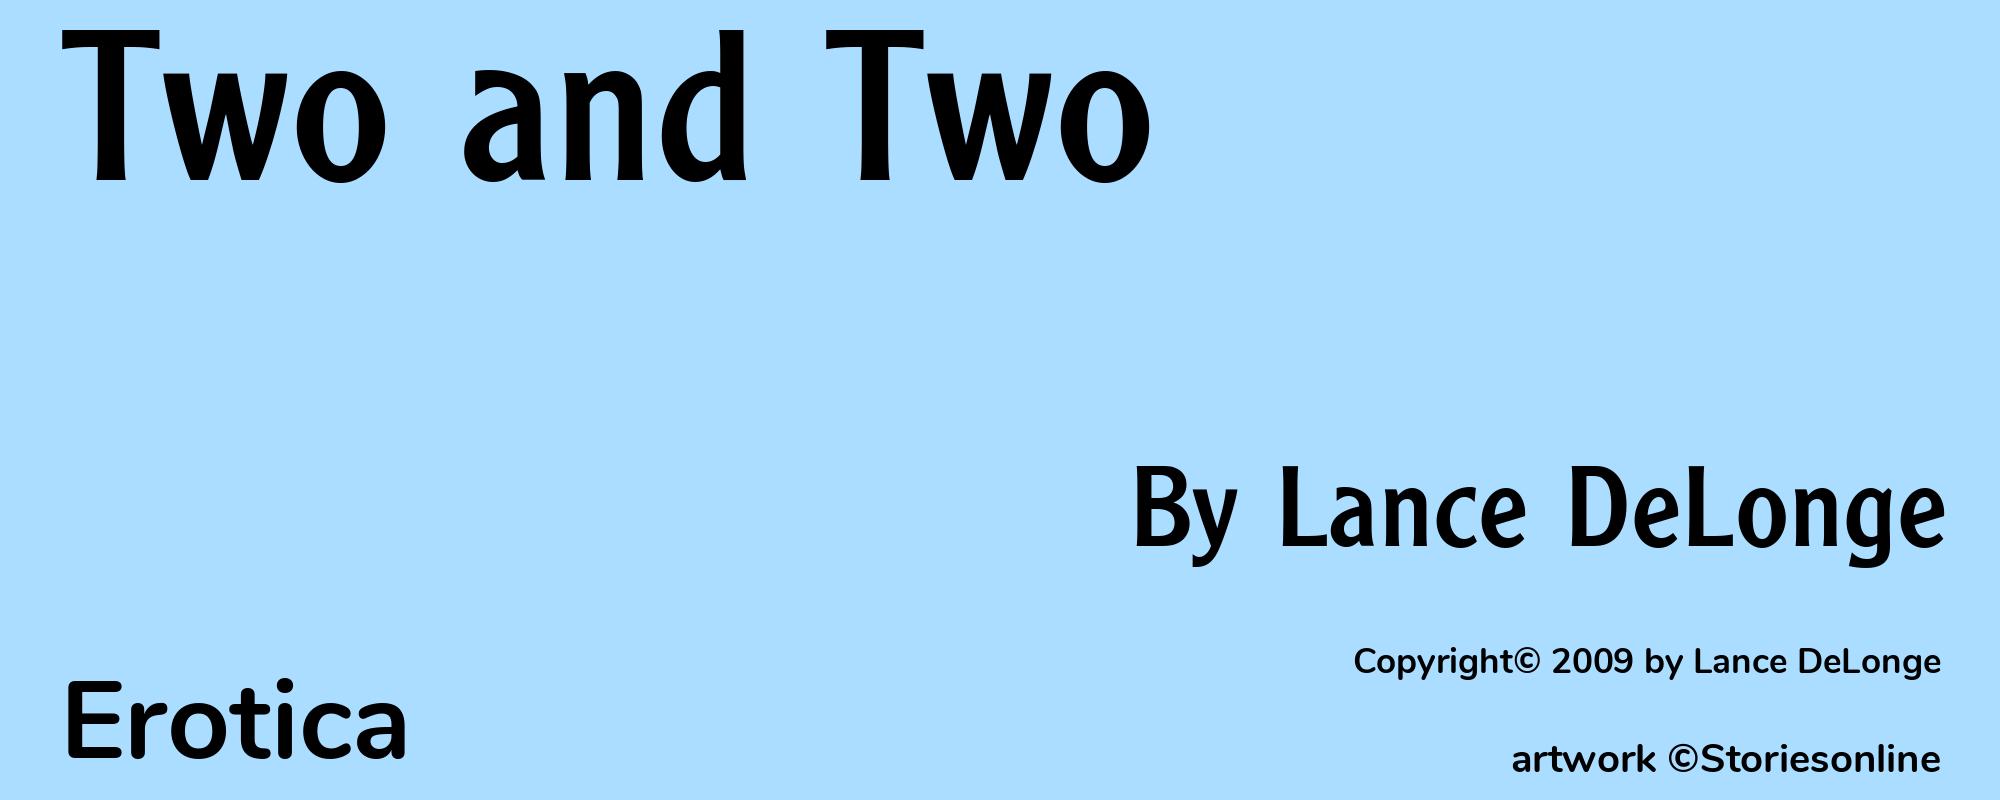 Two and Two - Cover